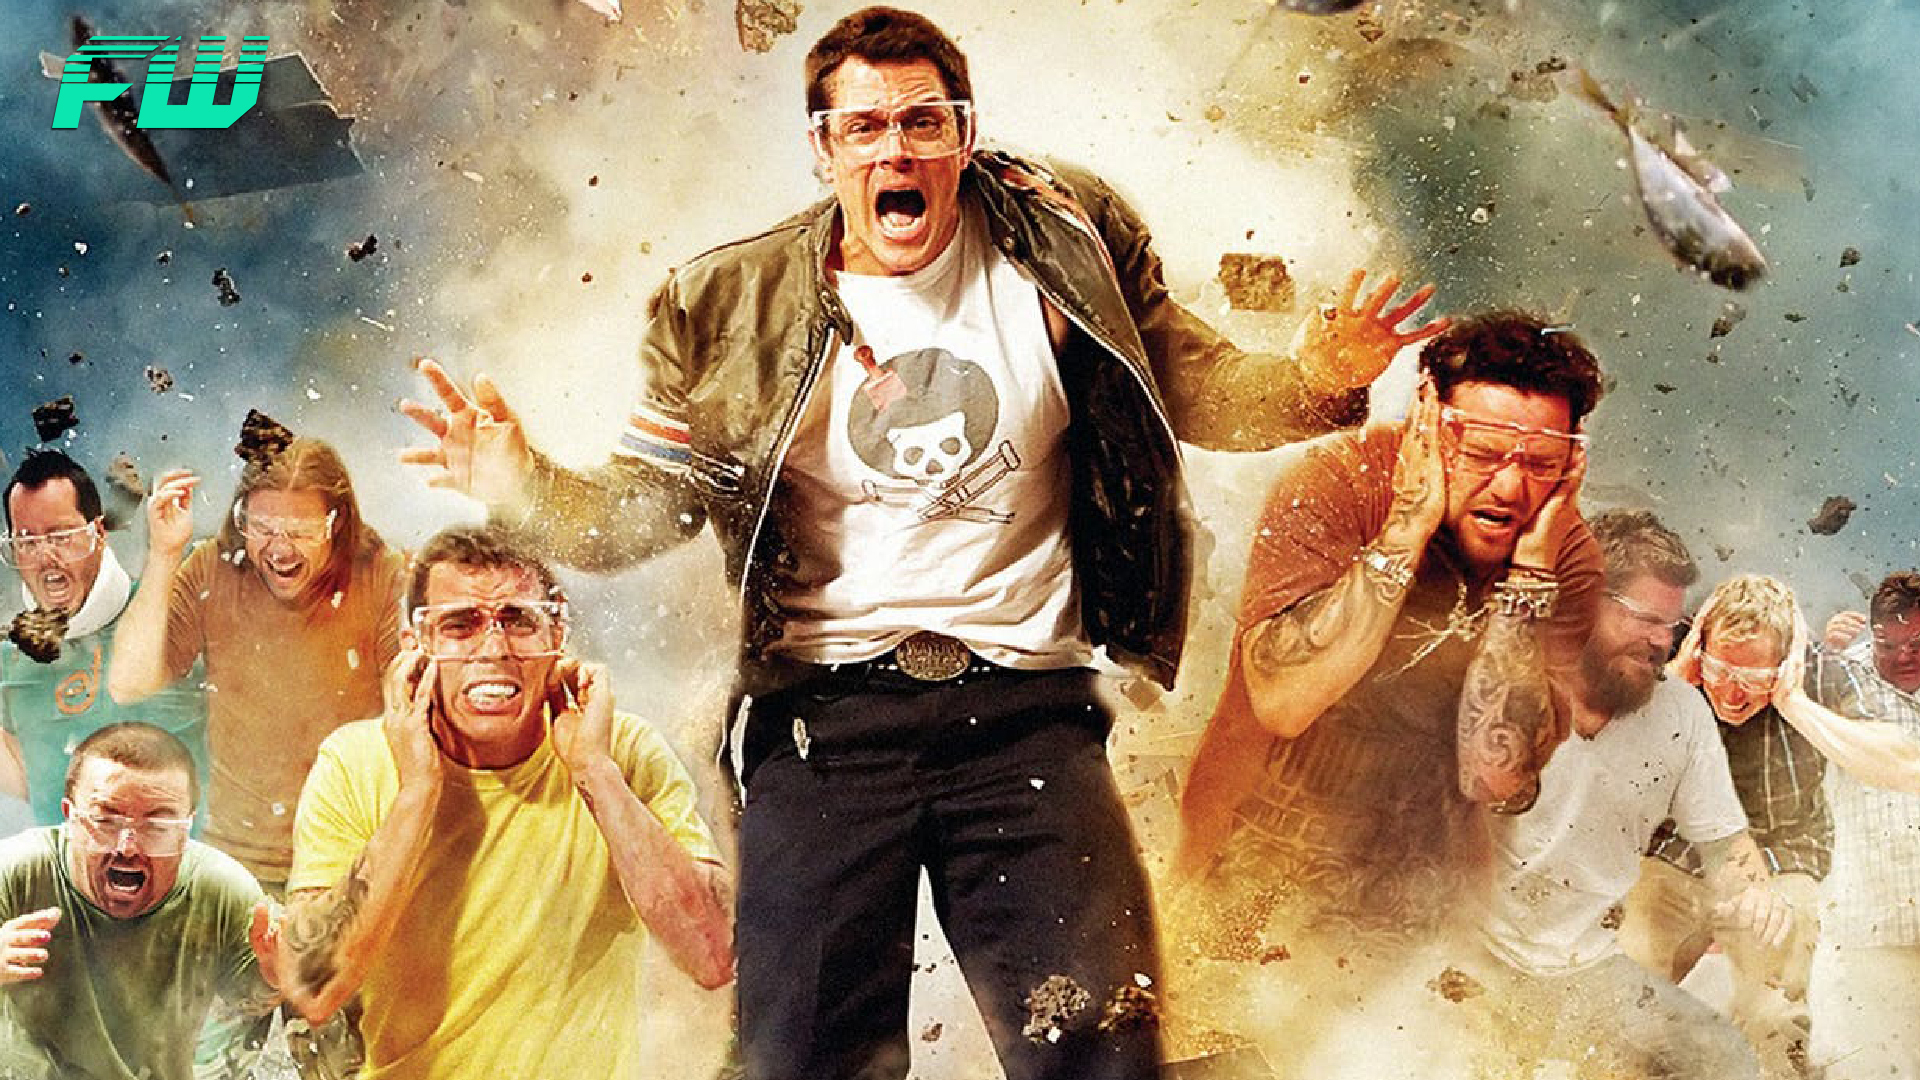 Paramount gives Jackass 4 New Release Date More